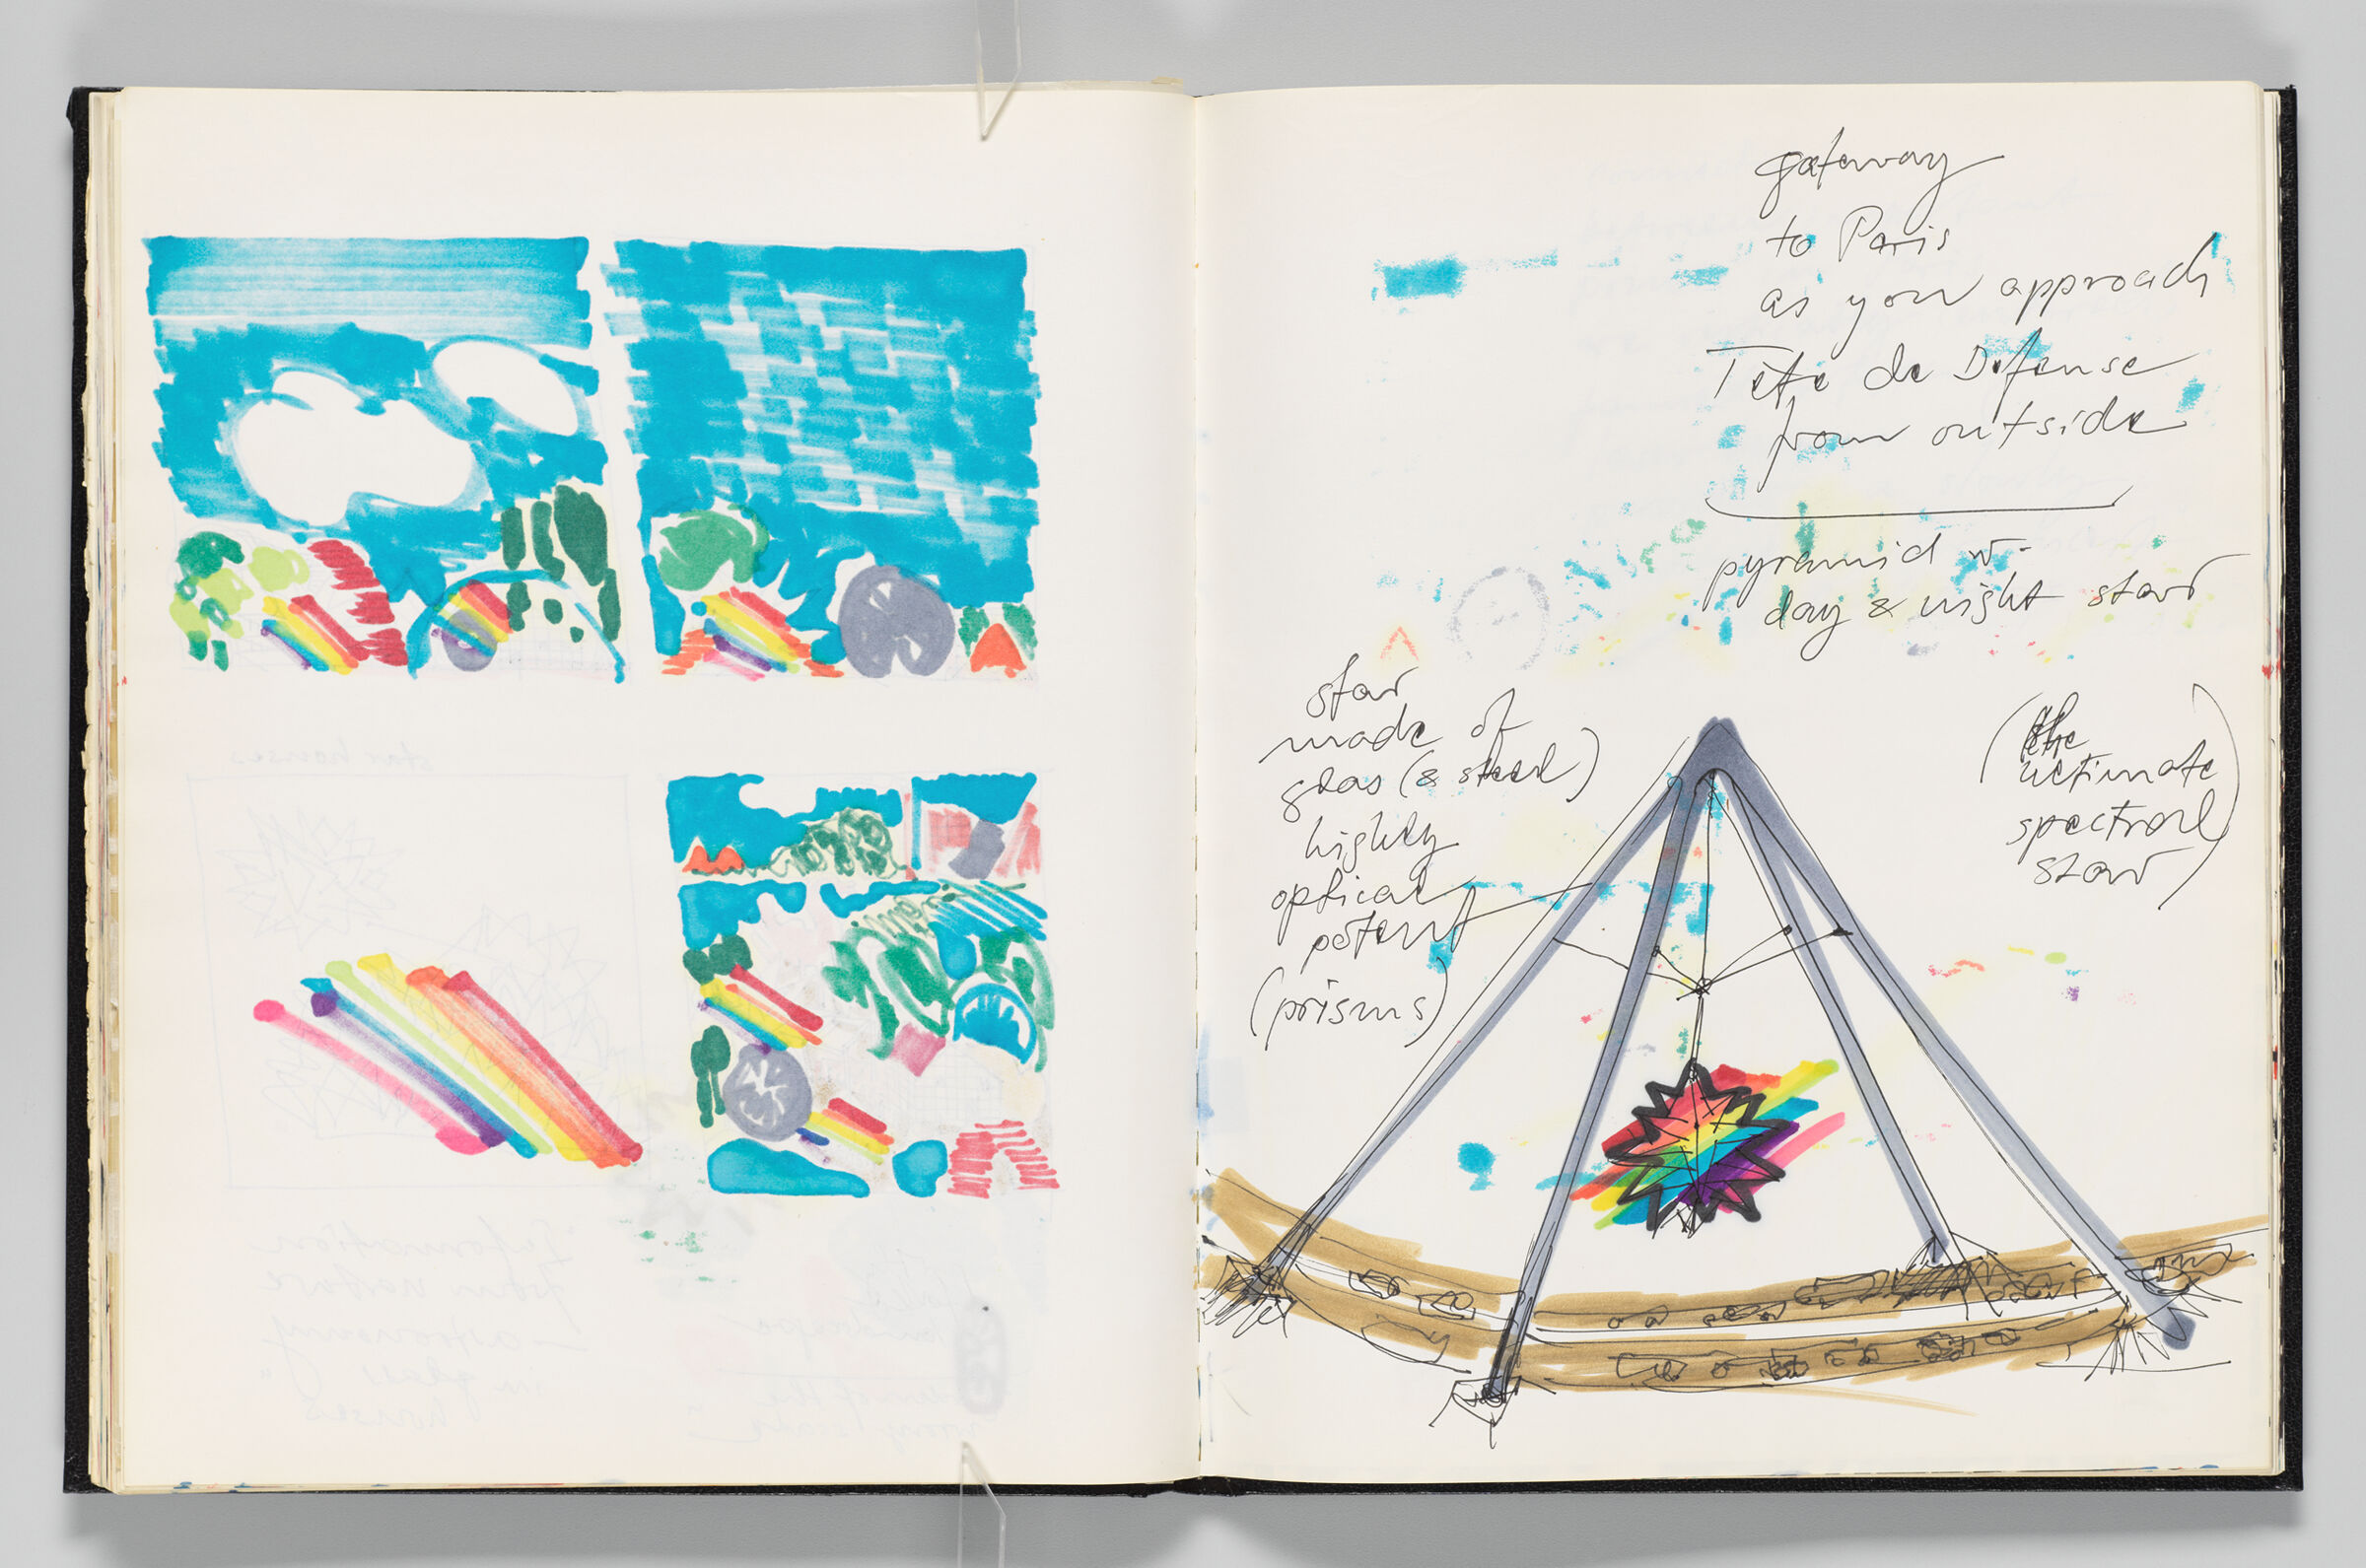 Untitled (Bleed-Through Of Previous Page, Left Page); Untitled (Prism/Star For Garden Installation, Right Page)